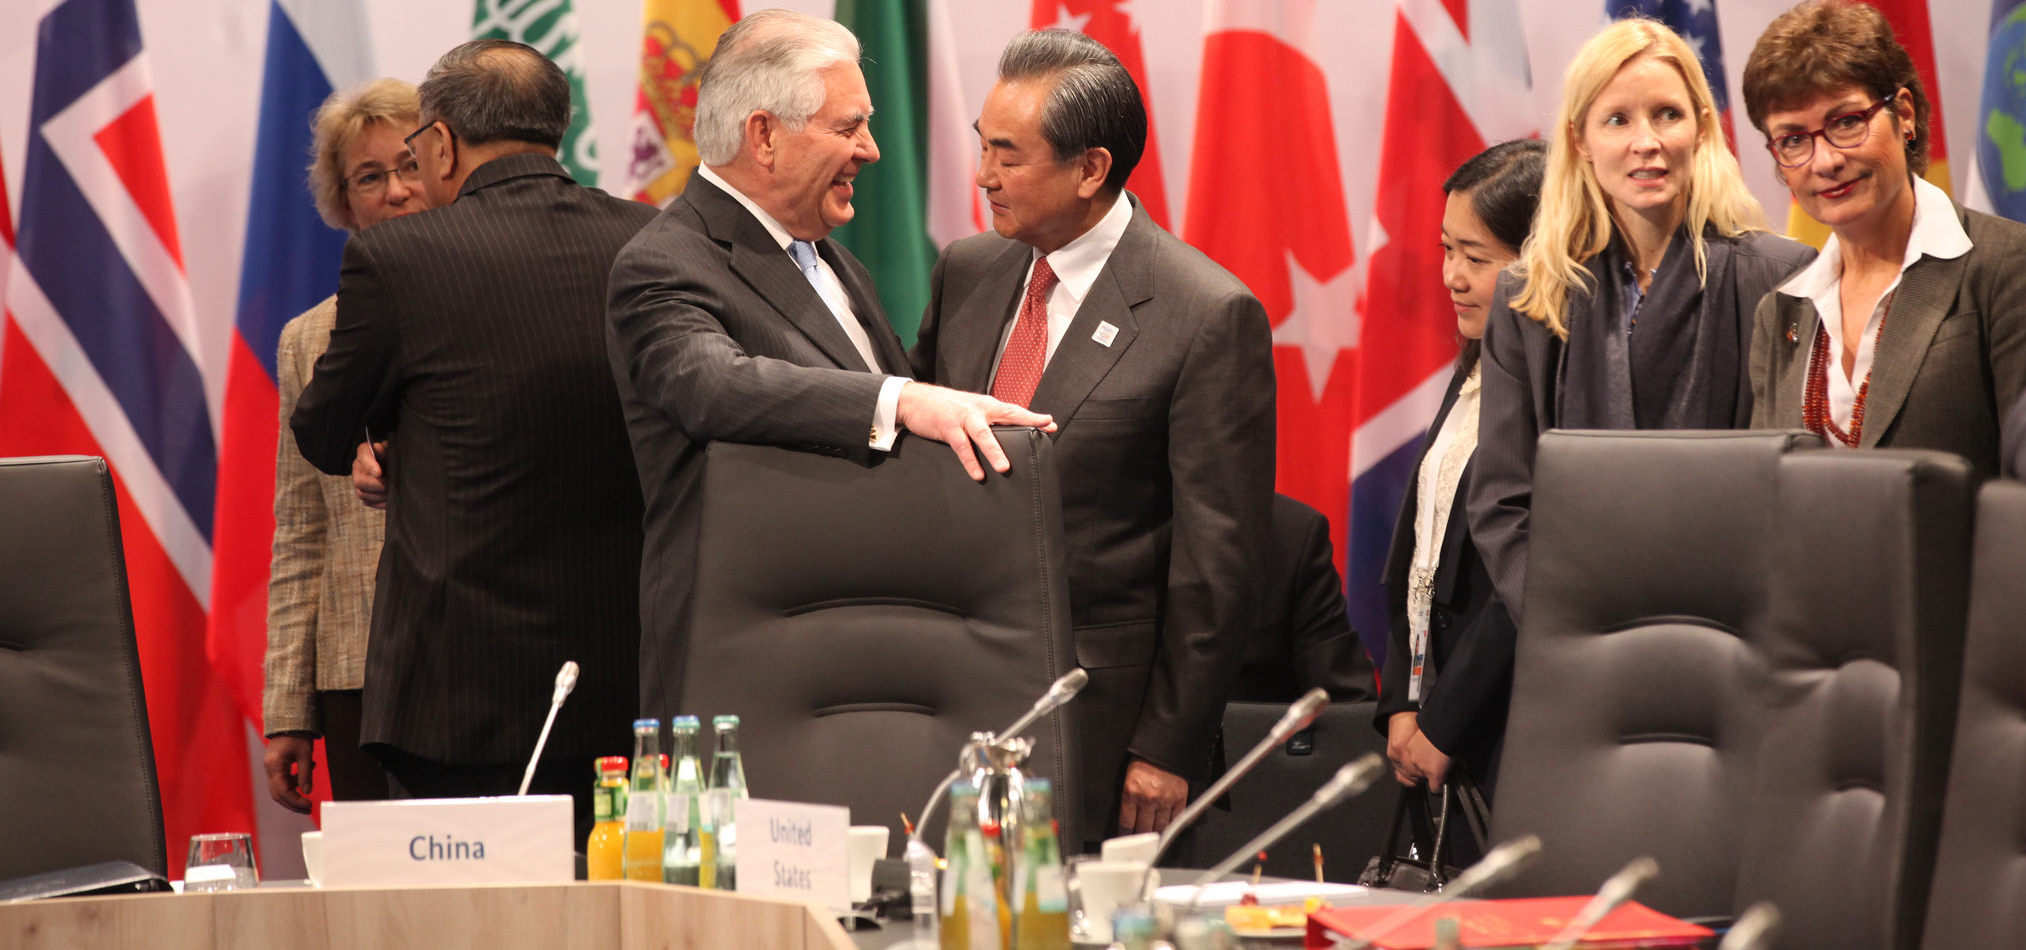 US Secretary of State Rex Tillerson in conversation with Chinese Foreign Minister Wang Yi at the G-20 Foreign Ministers’ Meeting in Germany, 2017 (Photo: Flickr/US Embassy in Germany)